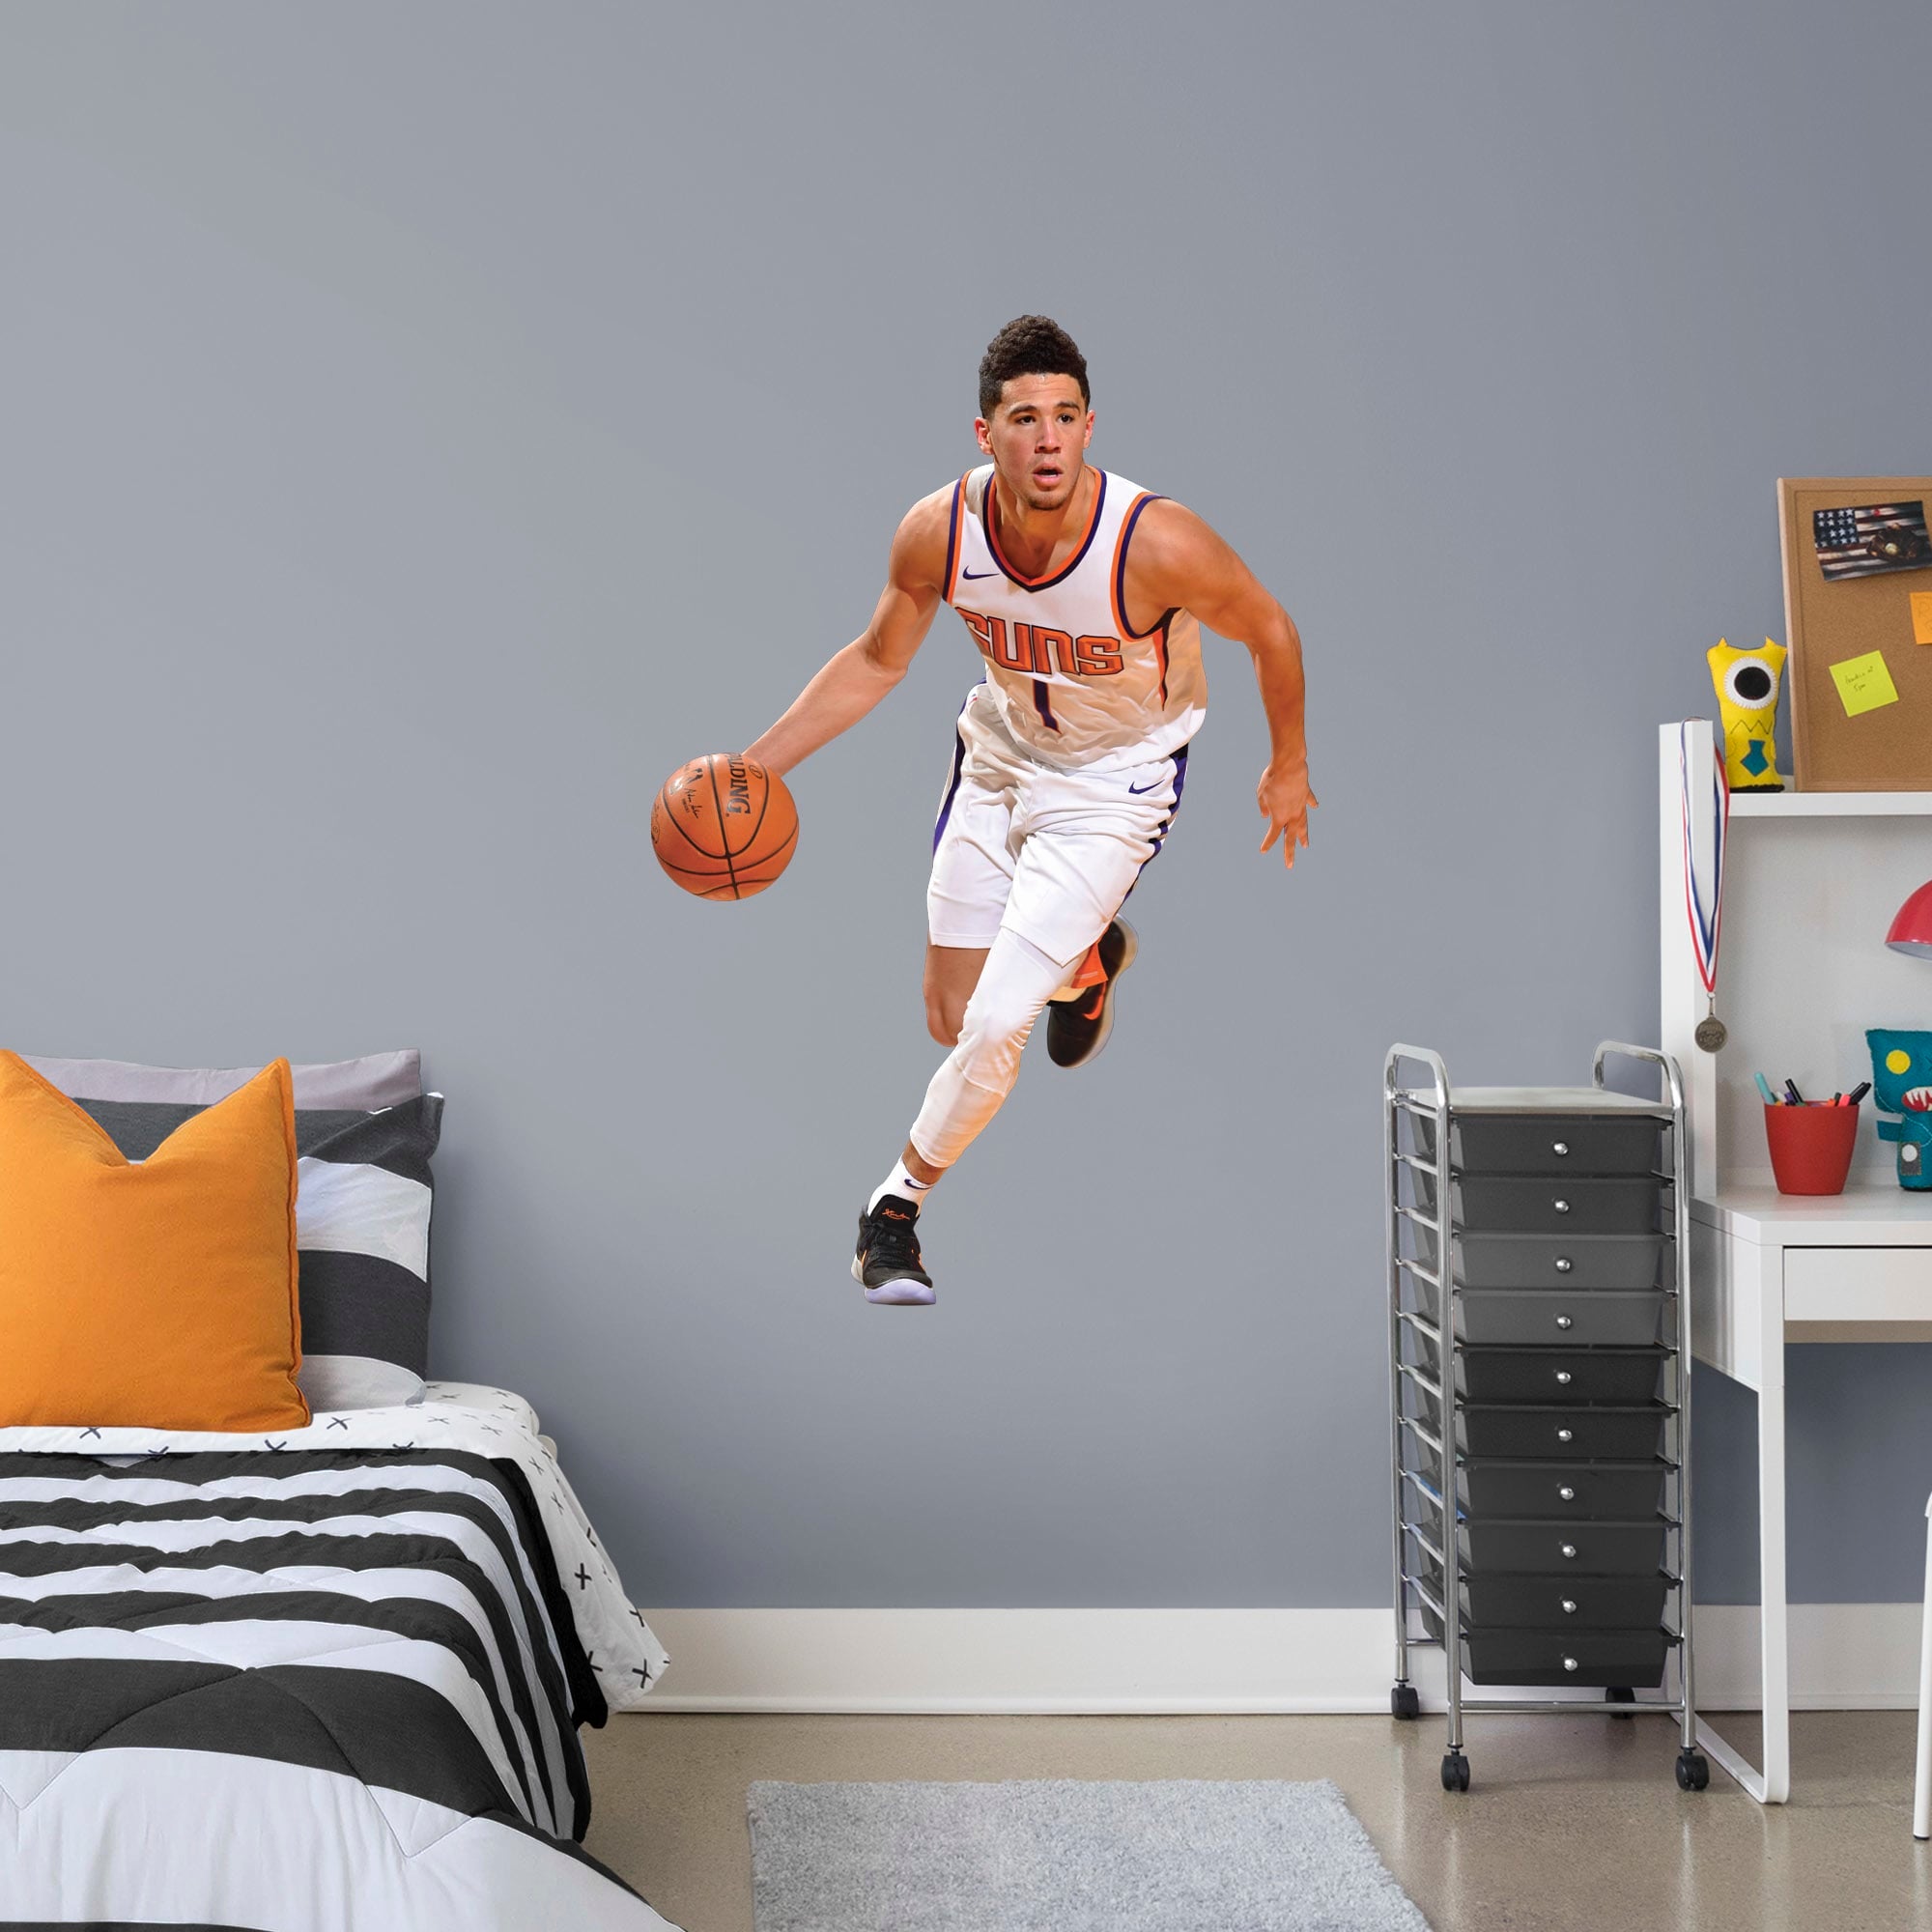 Devin Booker for Phoenix Suns - Officially Licensed NBA Removable Wall Decal Giant Athlete + 2 Decals (35"W x 52"H) by Fathead |